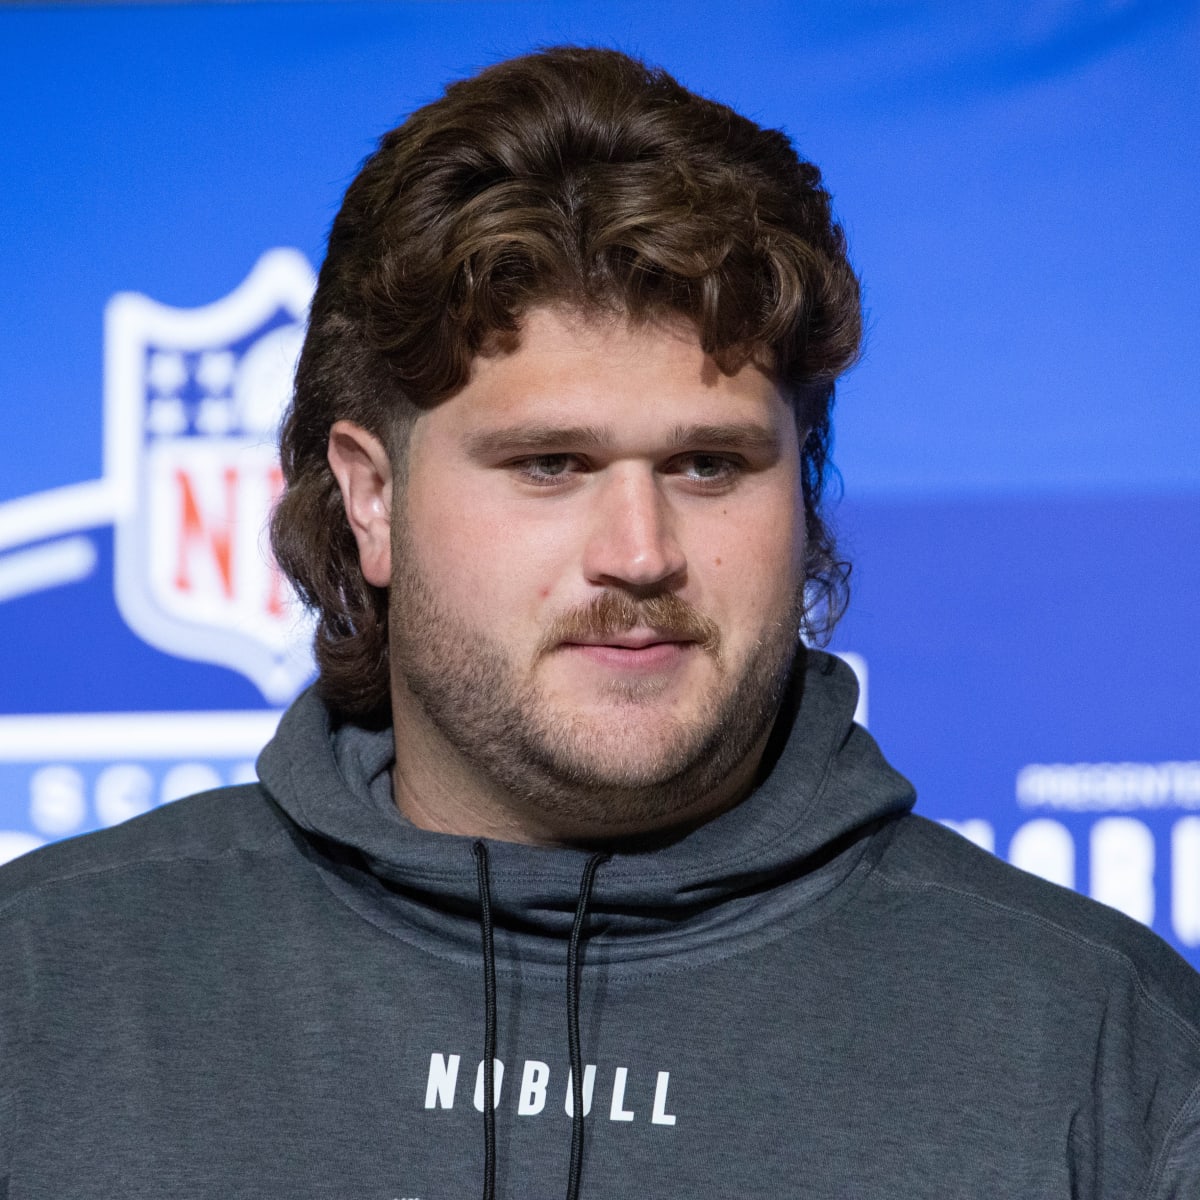 2023 NFL Draft: Gang Green Goes with 'Big Joe' Tippmann in Second